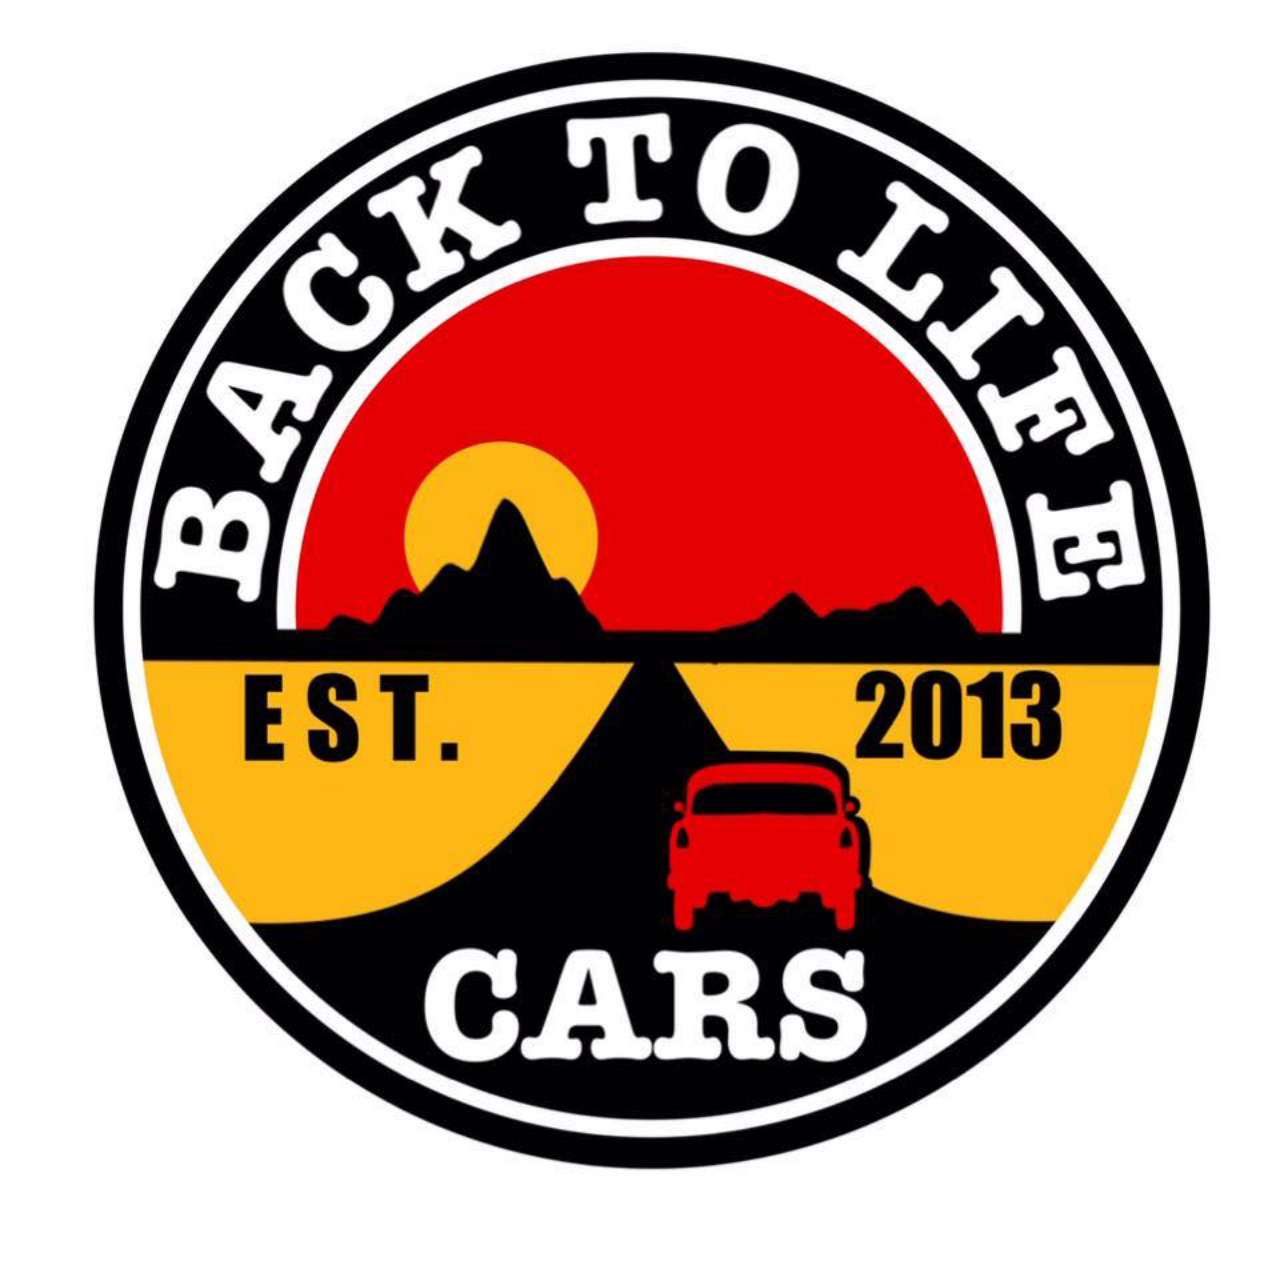 Back to Life Cars